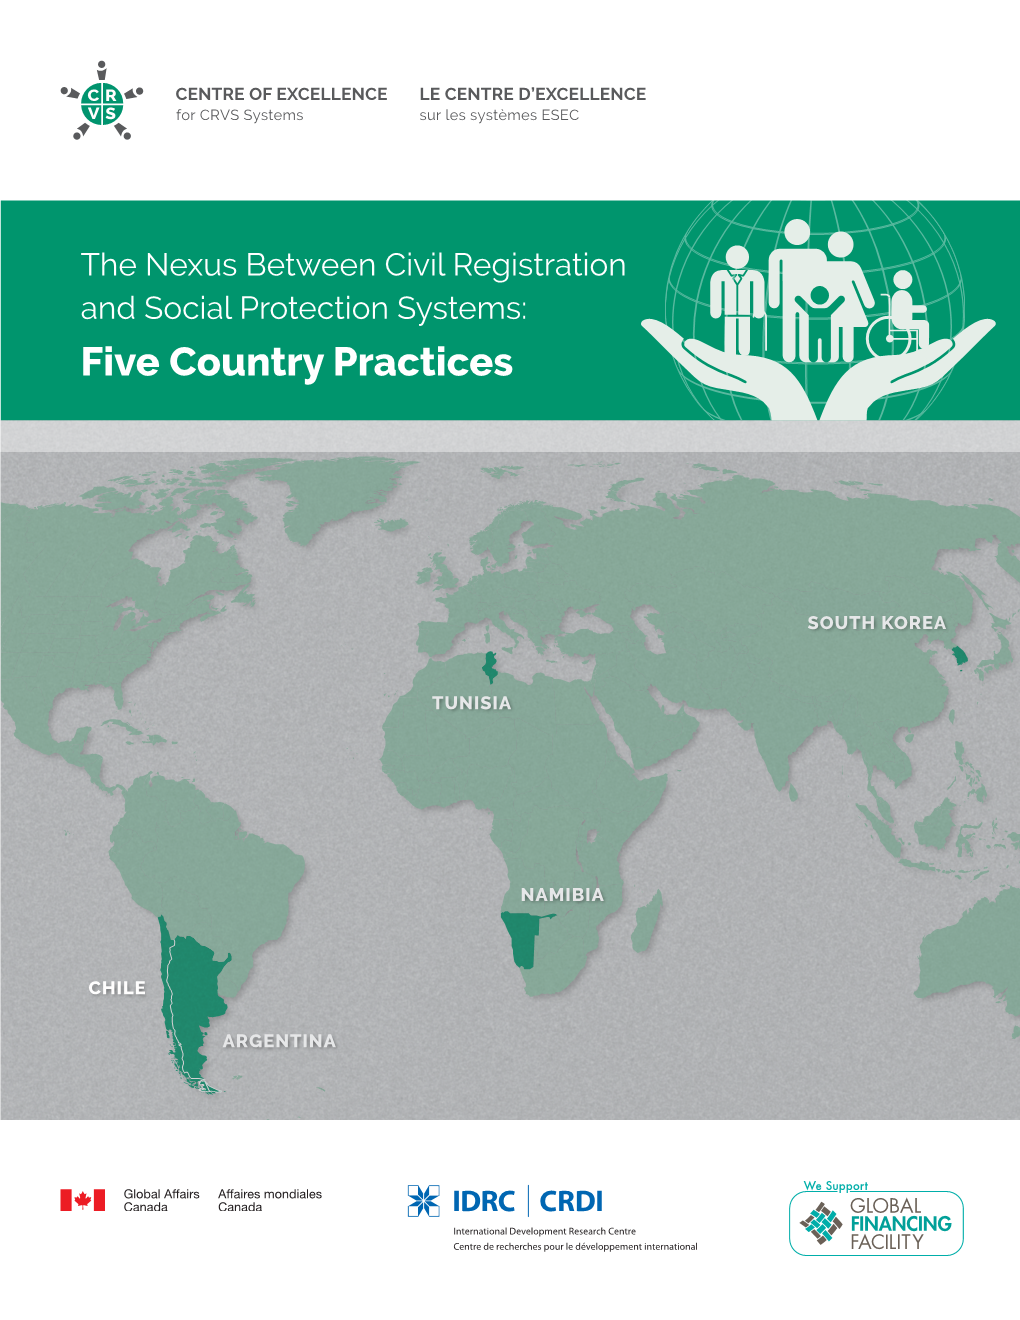 The Nexus Between Civil Registration and Social Protection Systems: Five Country Practices